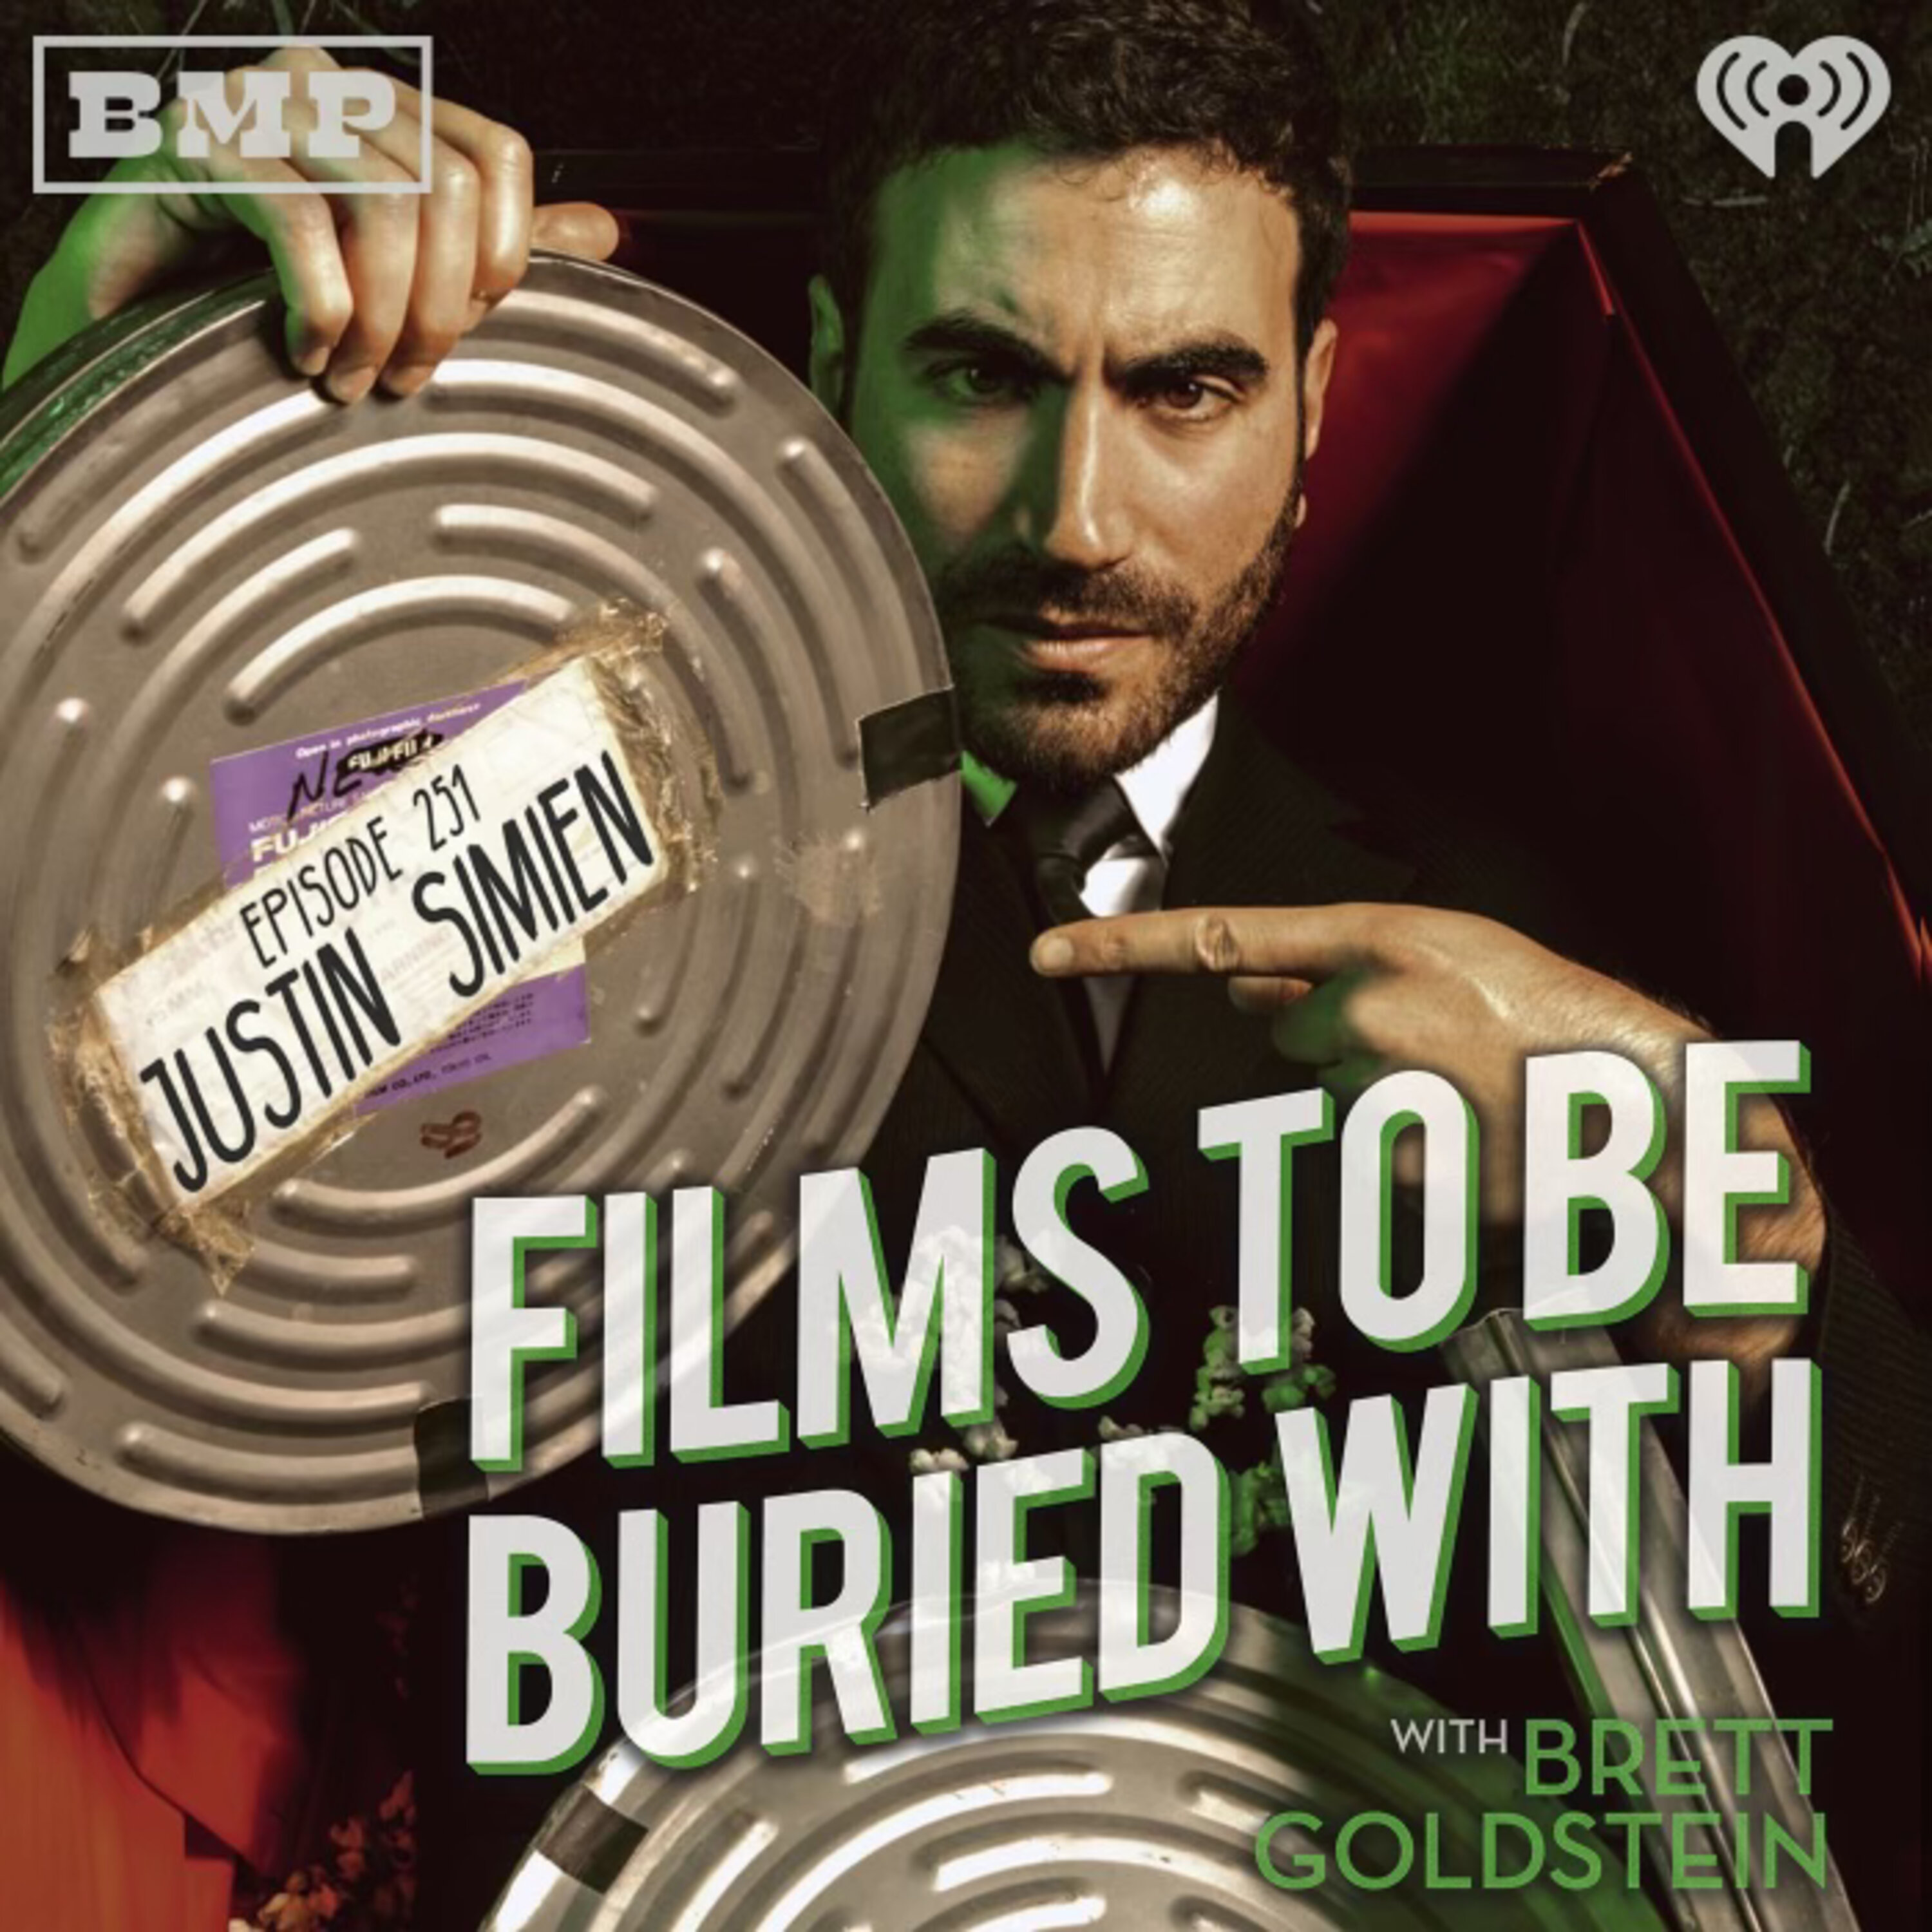 Justin Simien • Films To Be Buried With with Brett Goldstein #251